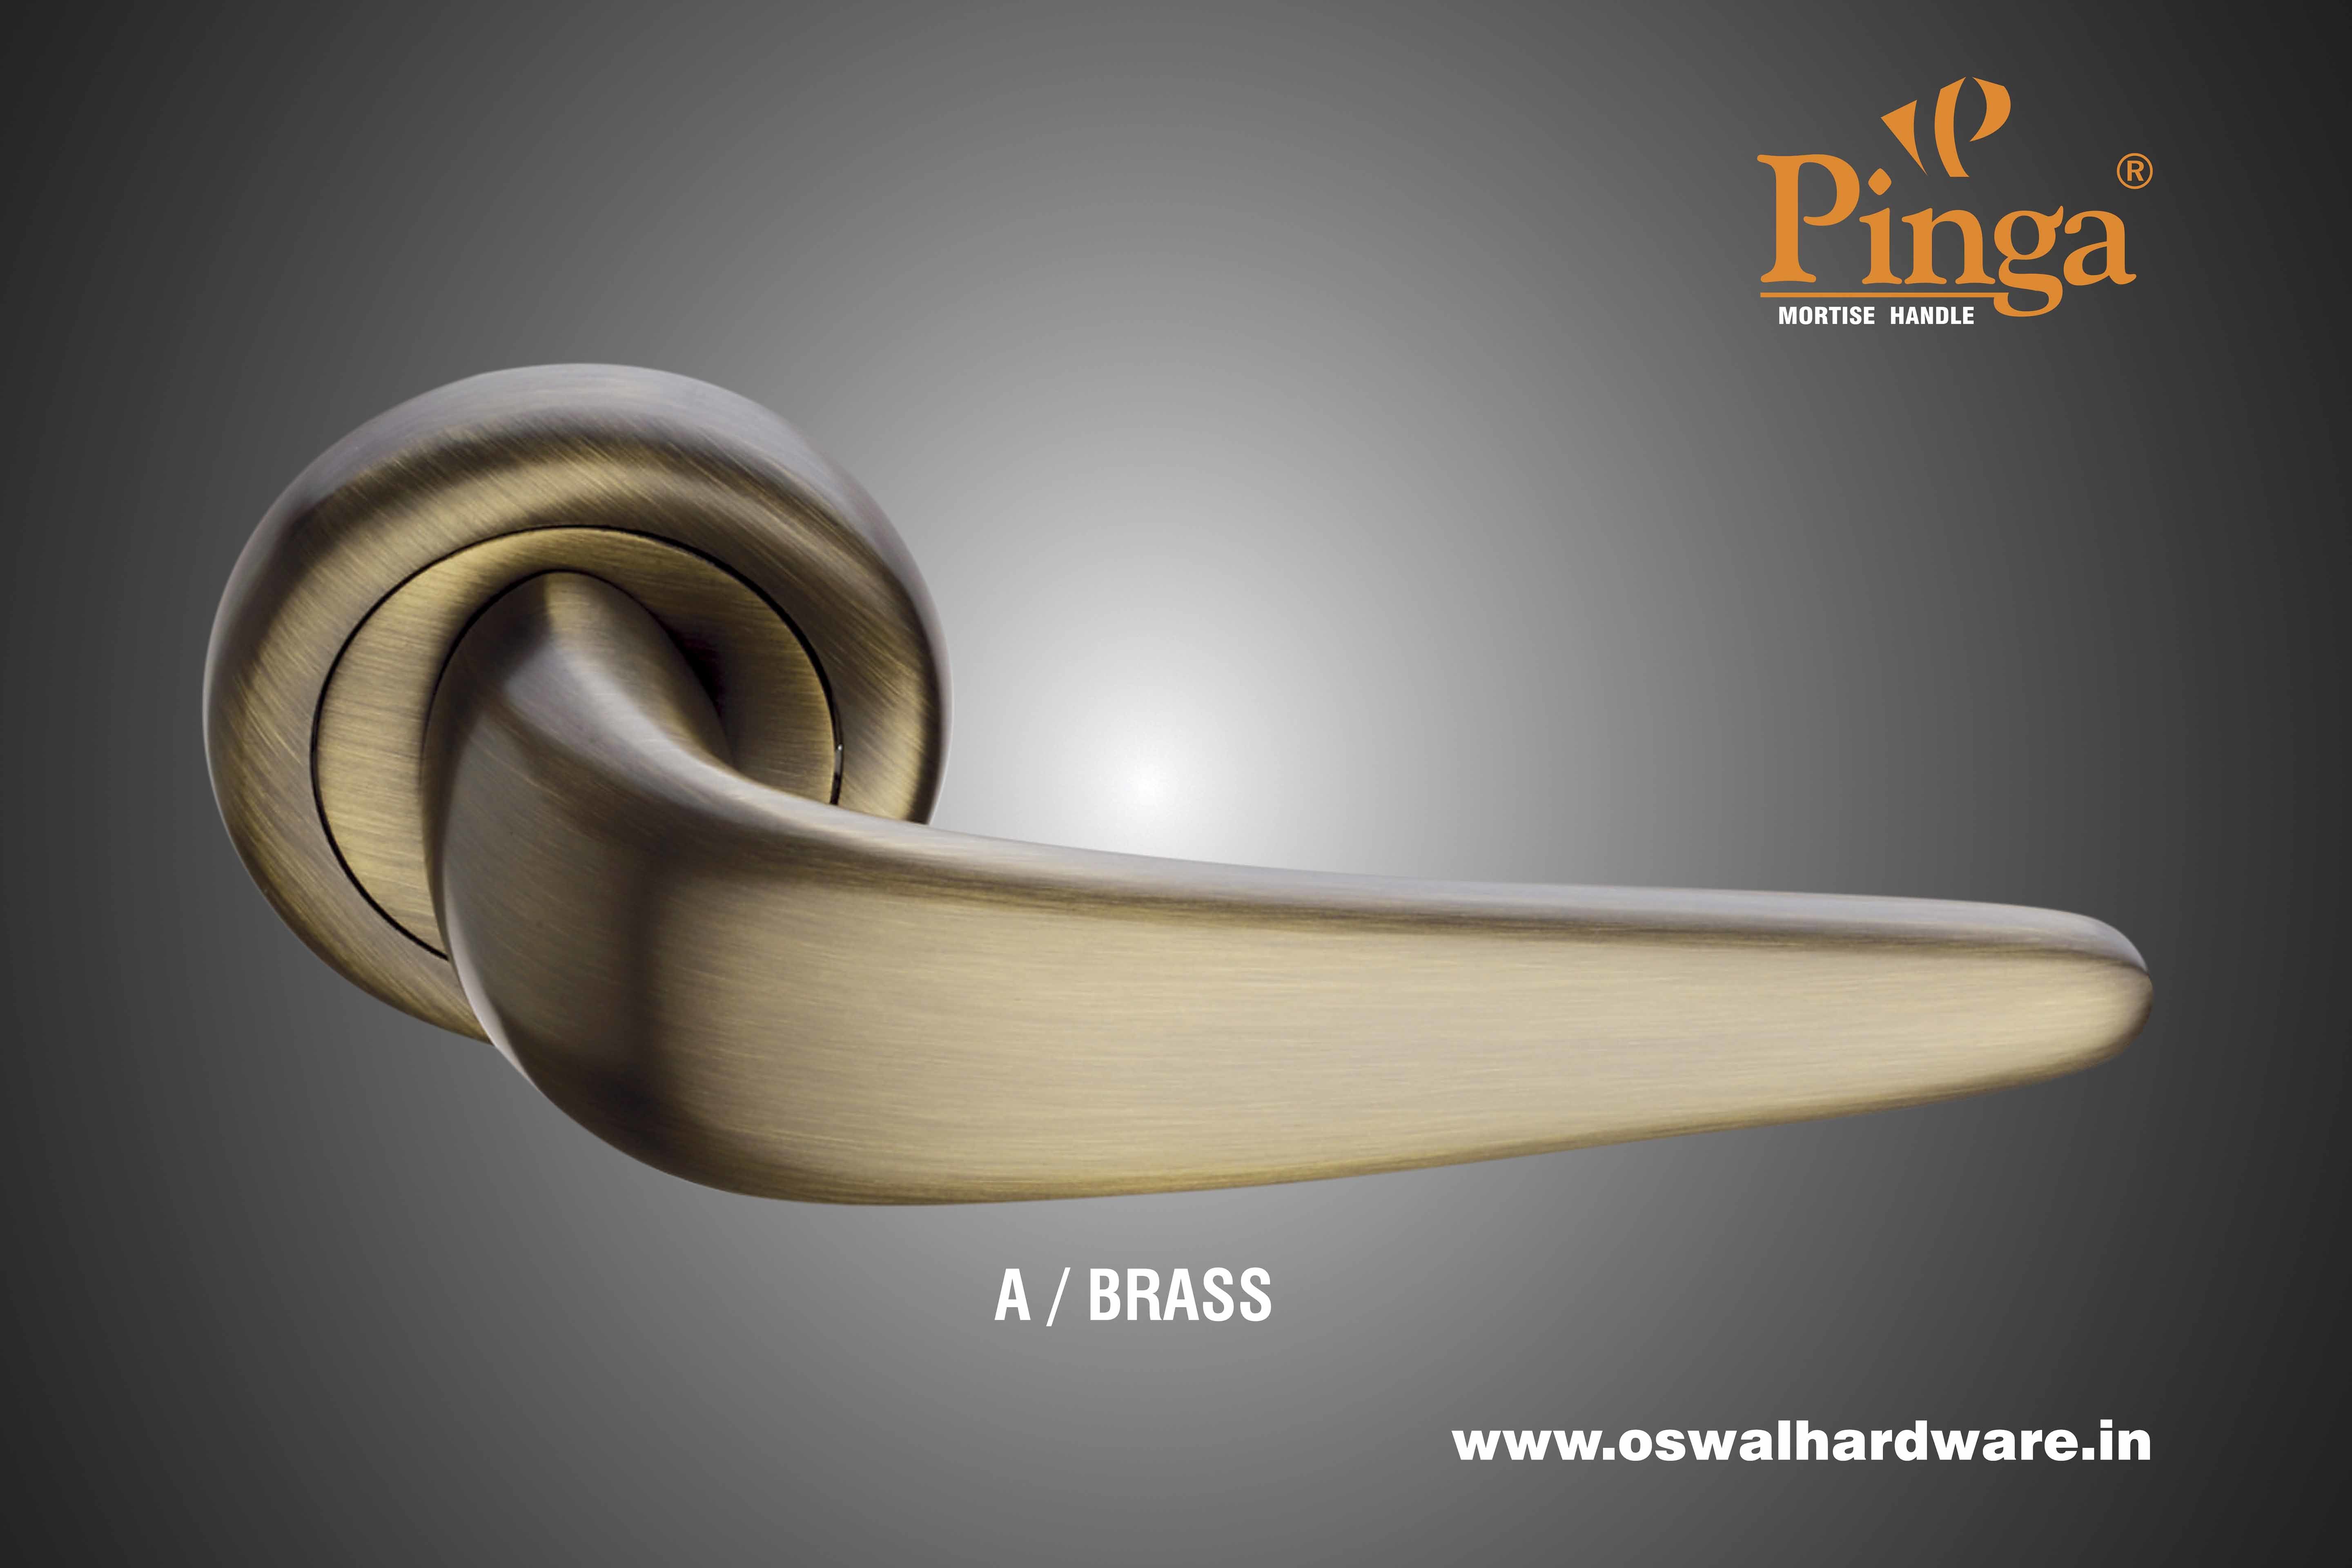 Mortise Handle Brass 2016